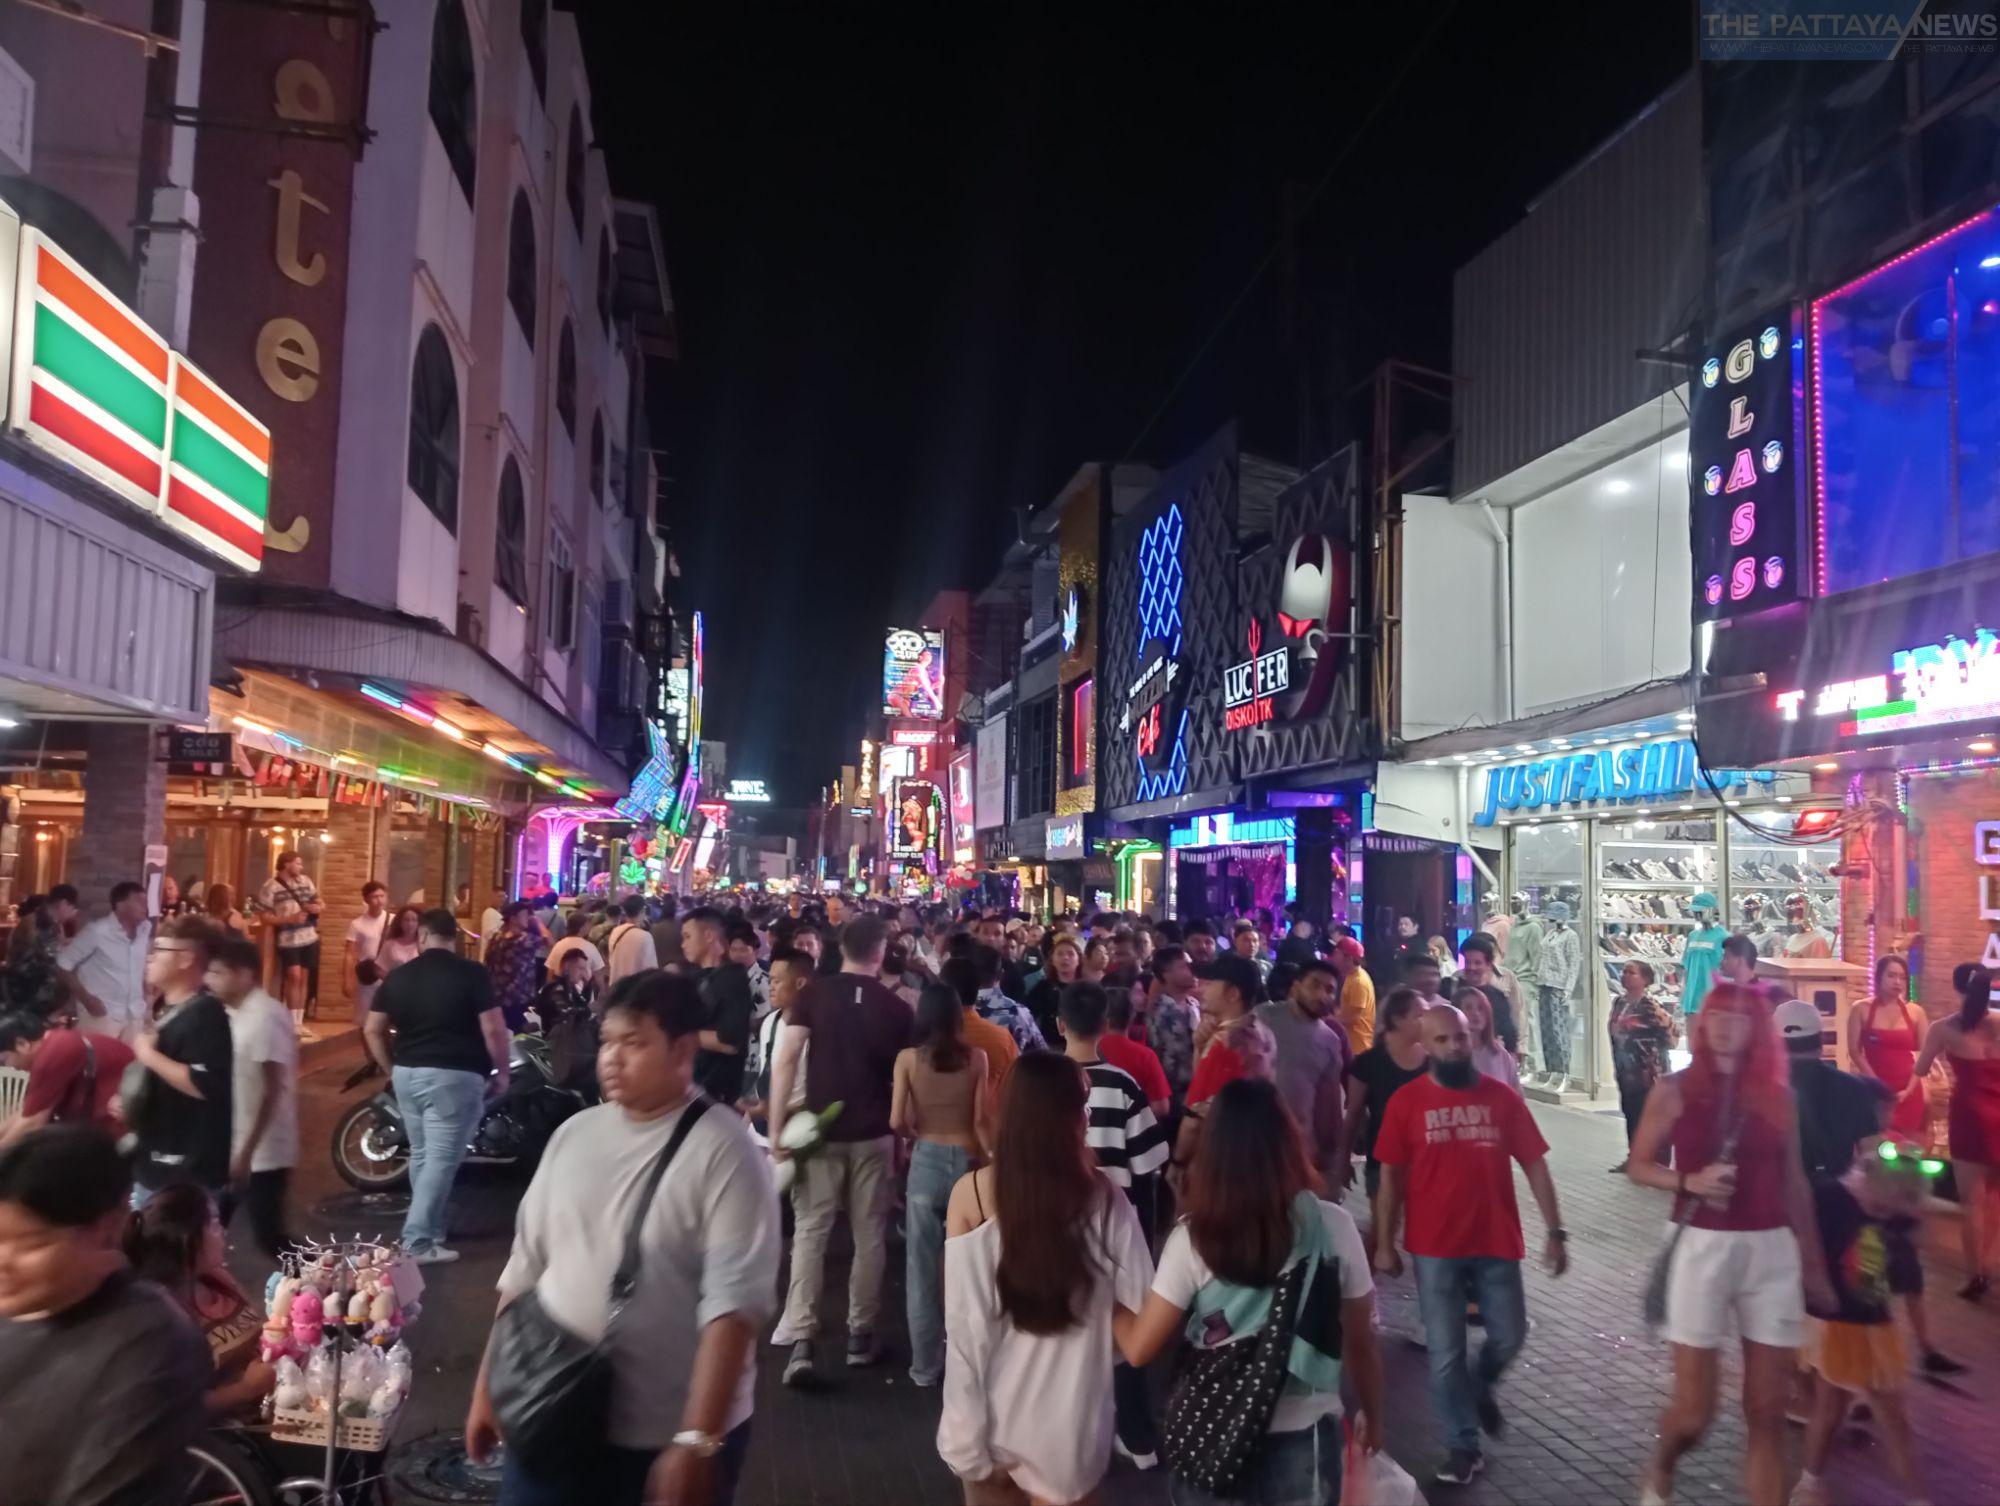 Pattaya Nightlife Sees Boom After Extended Operating Hours, Bars Want Entertainment Zones Expanded